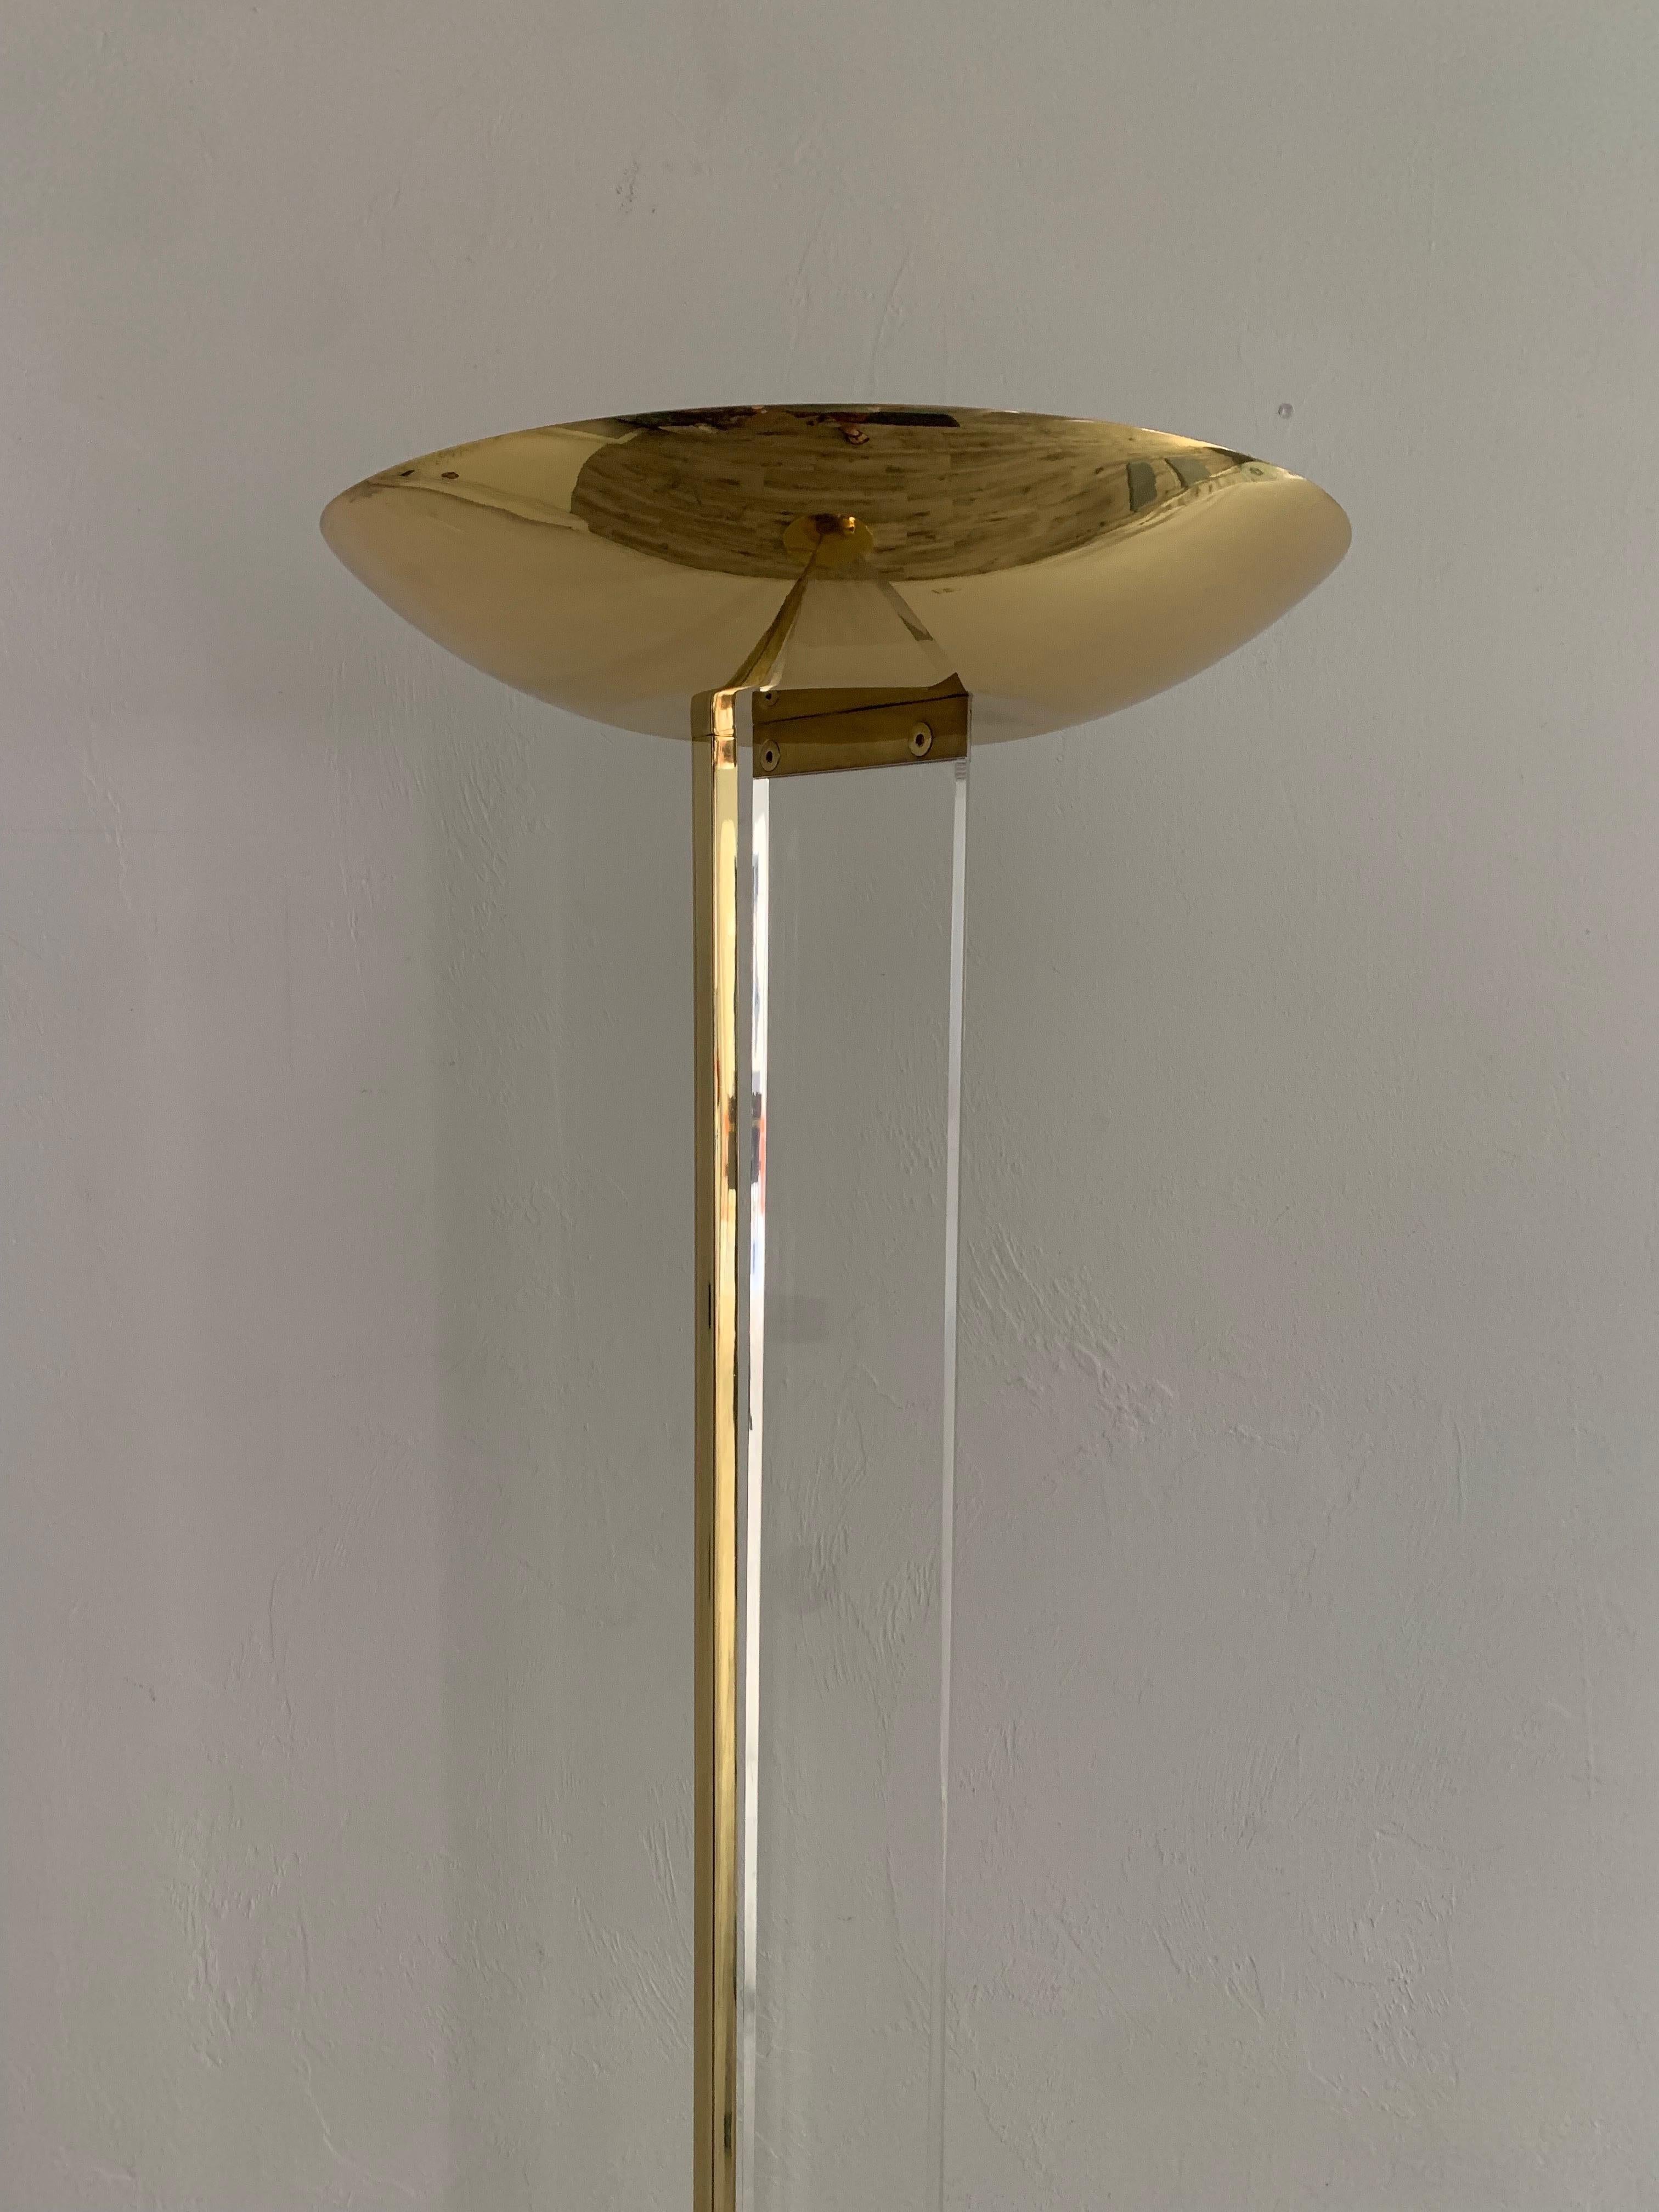 American Hollywood Regency Lucite and Brass Floor Lamp by Fredrick Ramond For Sale